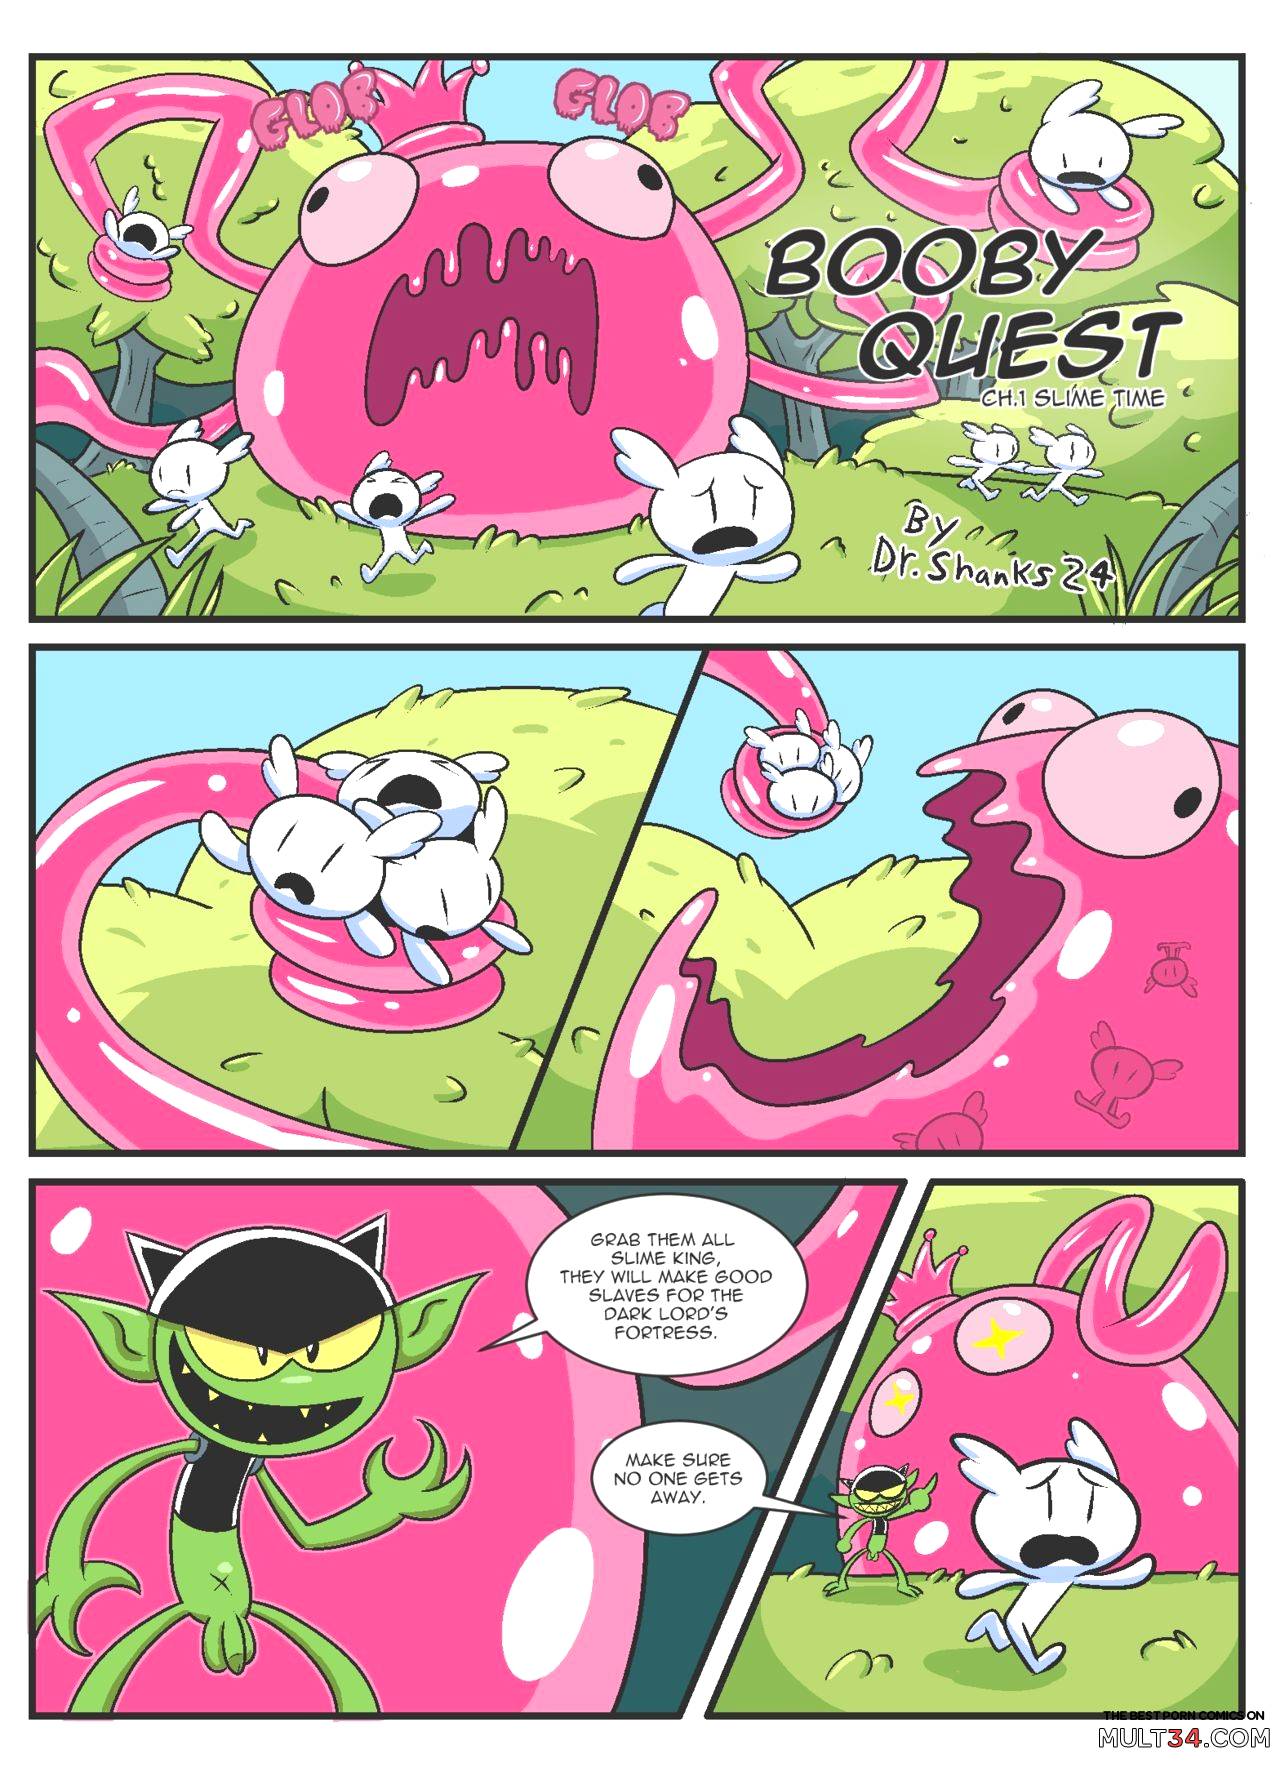 Booby Quest 1-4 page 2